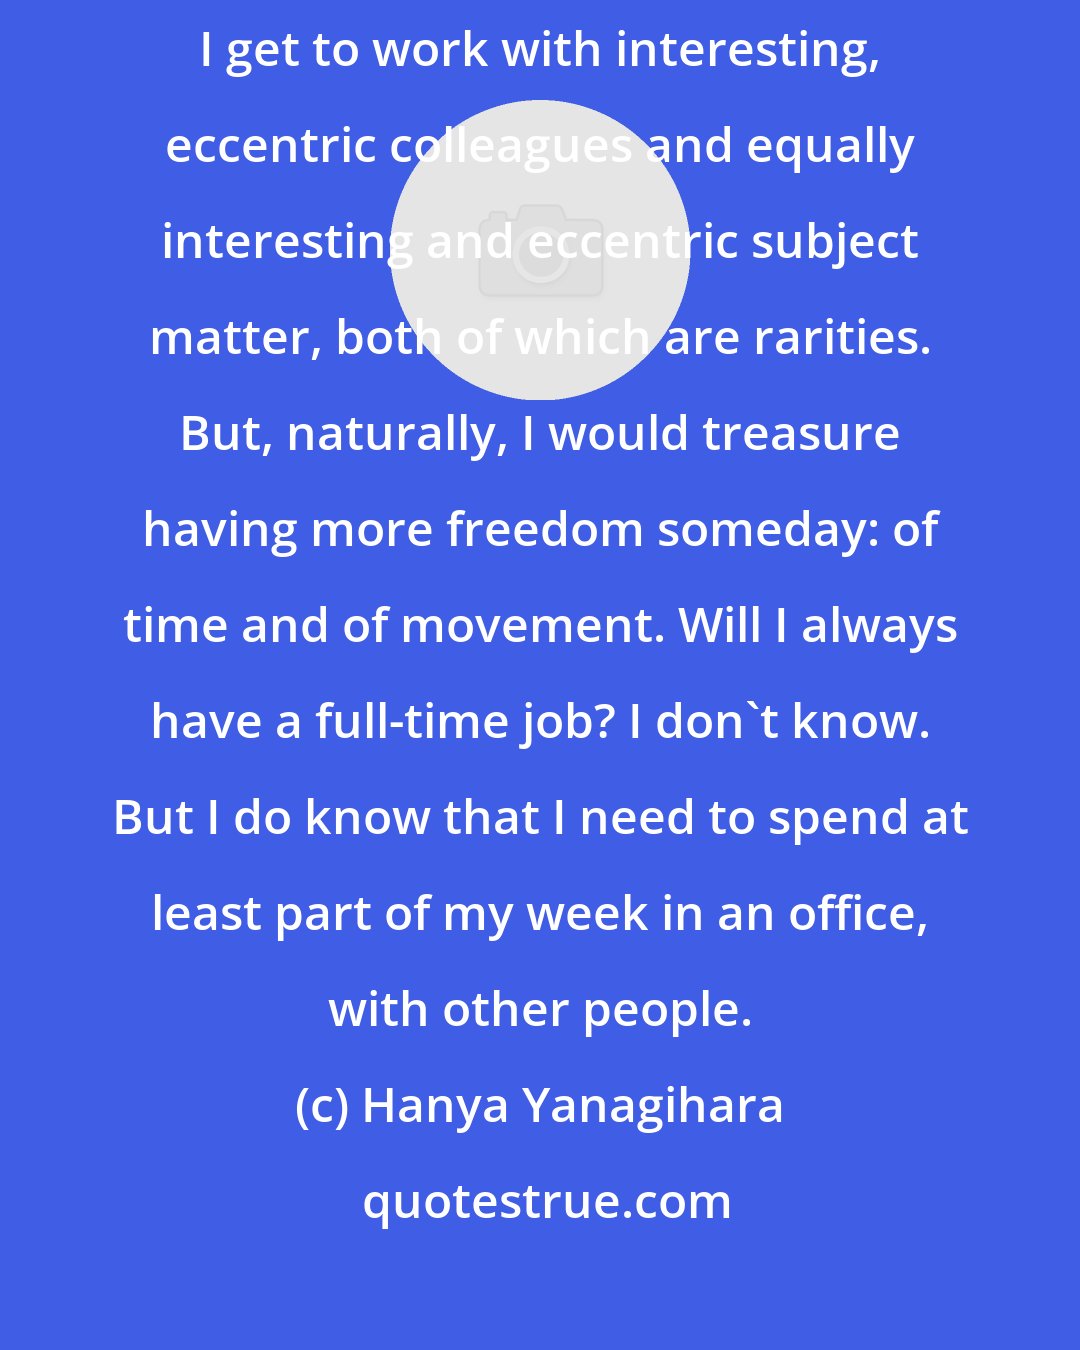 Hanya Yanagihara: There are times I wish I didn't have a job, even though I love my job: I get to work with interesting, eccentric colleagues and equally interesting and eccentric subject matter, both of which are rarities. But, naturally, I would treasure having more freedom someday: of time and of movement. Will I always have a full-time job? I don't know. But I do know that I need to spend at least part of my week in an office, with other people.